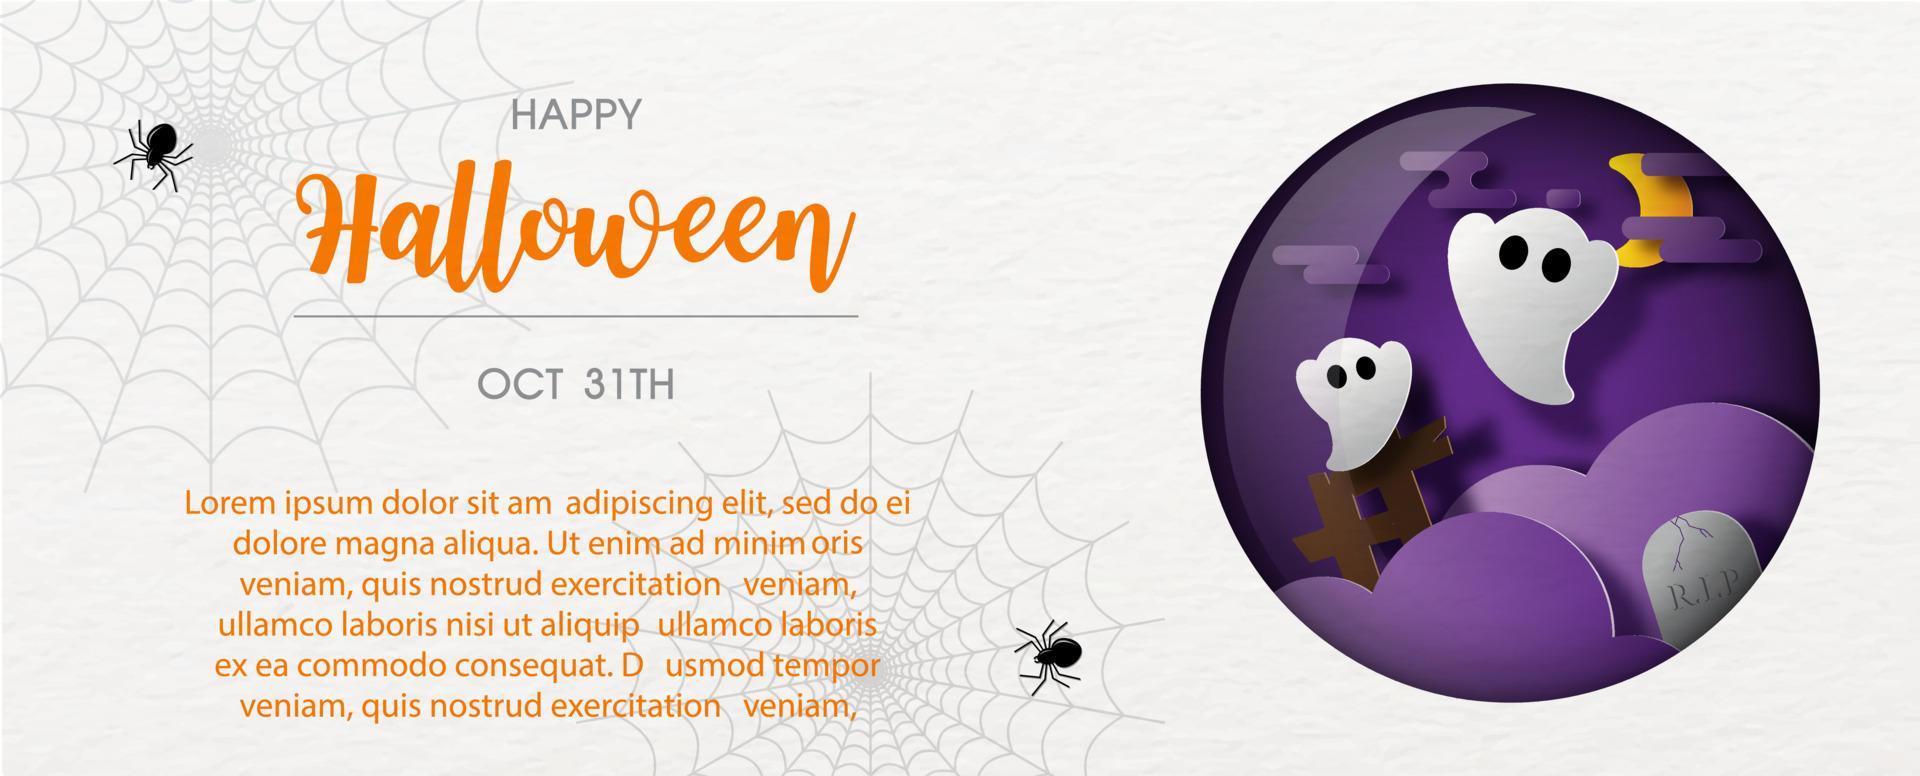 Halloween cute ghosts with night clouds in a glass balls. Happy Halloween greeting card in paper cut style and web banner design with example texts on paper pattern and white background. vector